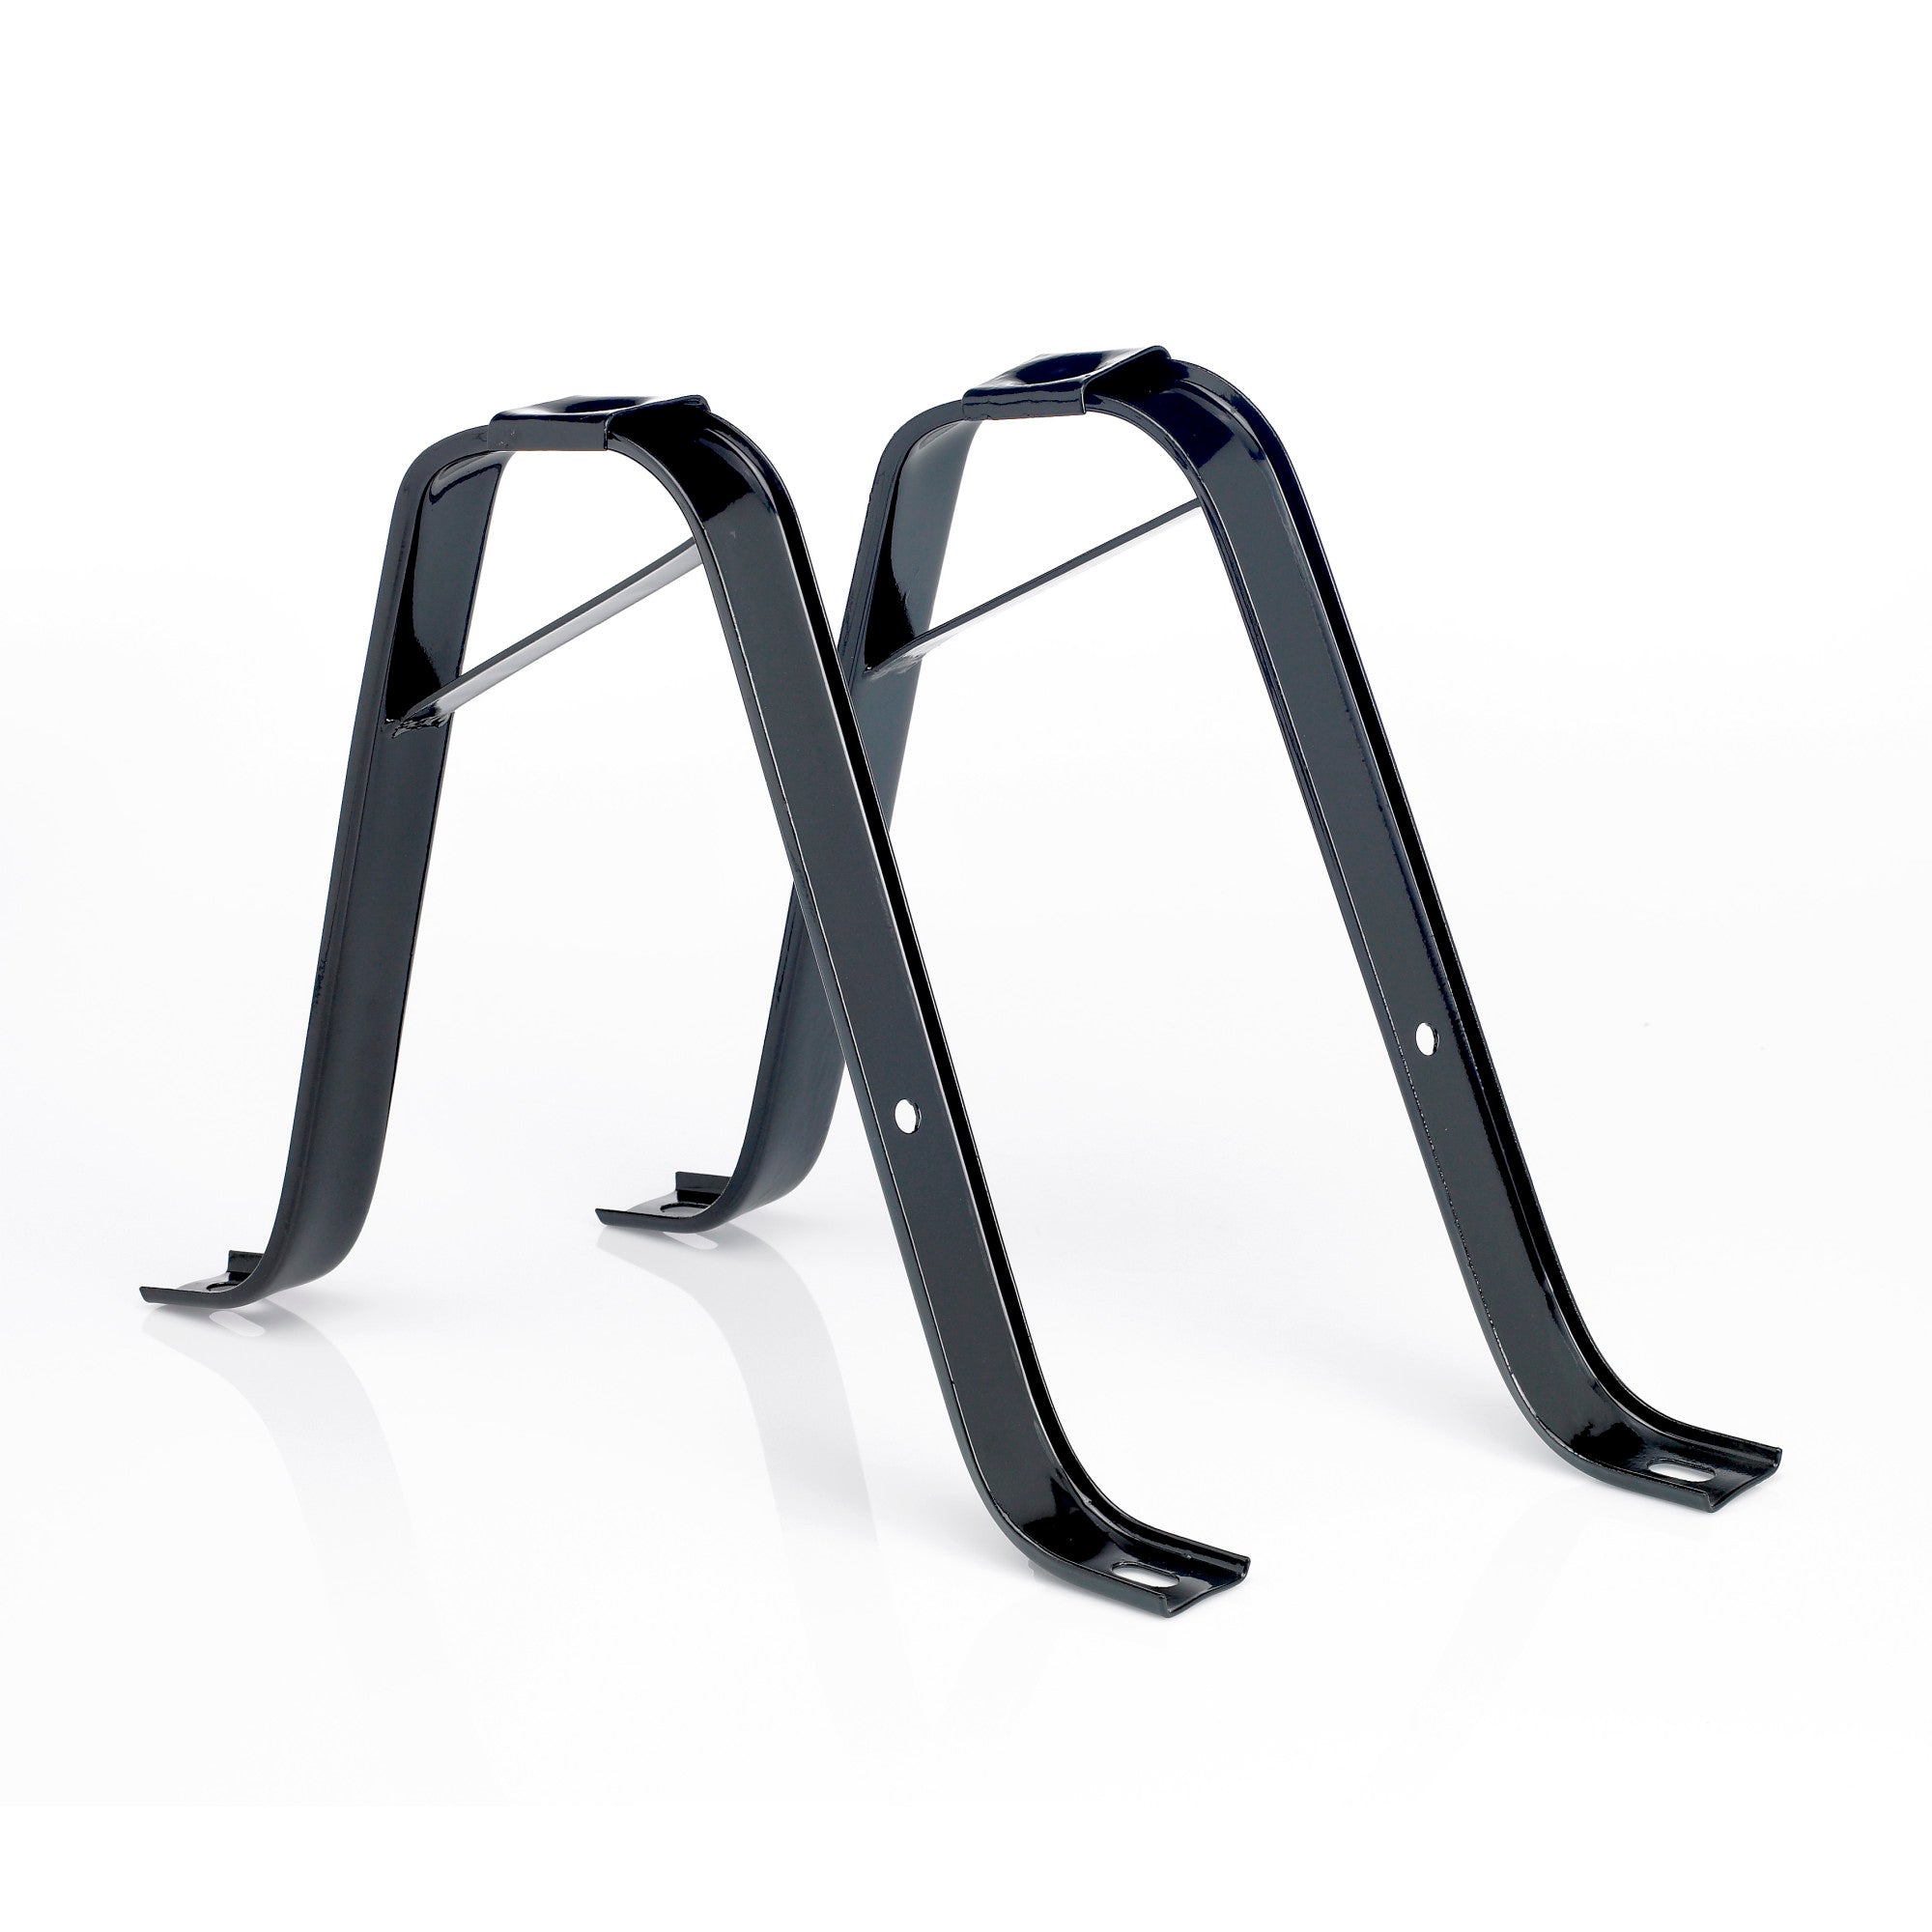 Replacement Stand Pair for Heavy-Duty Steel Wheelbarrow